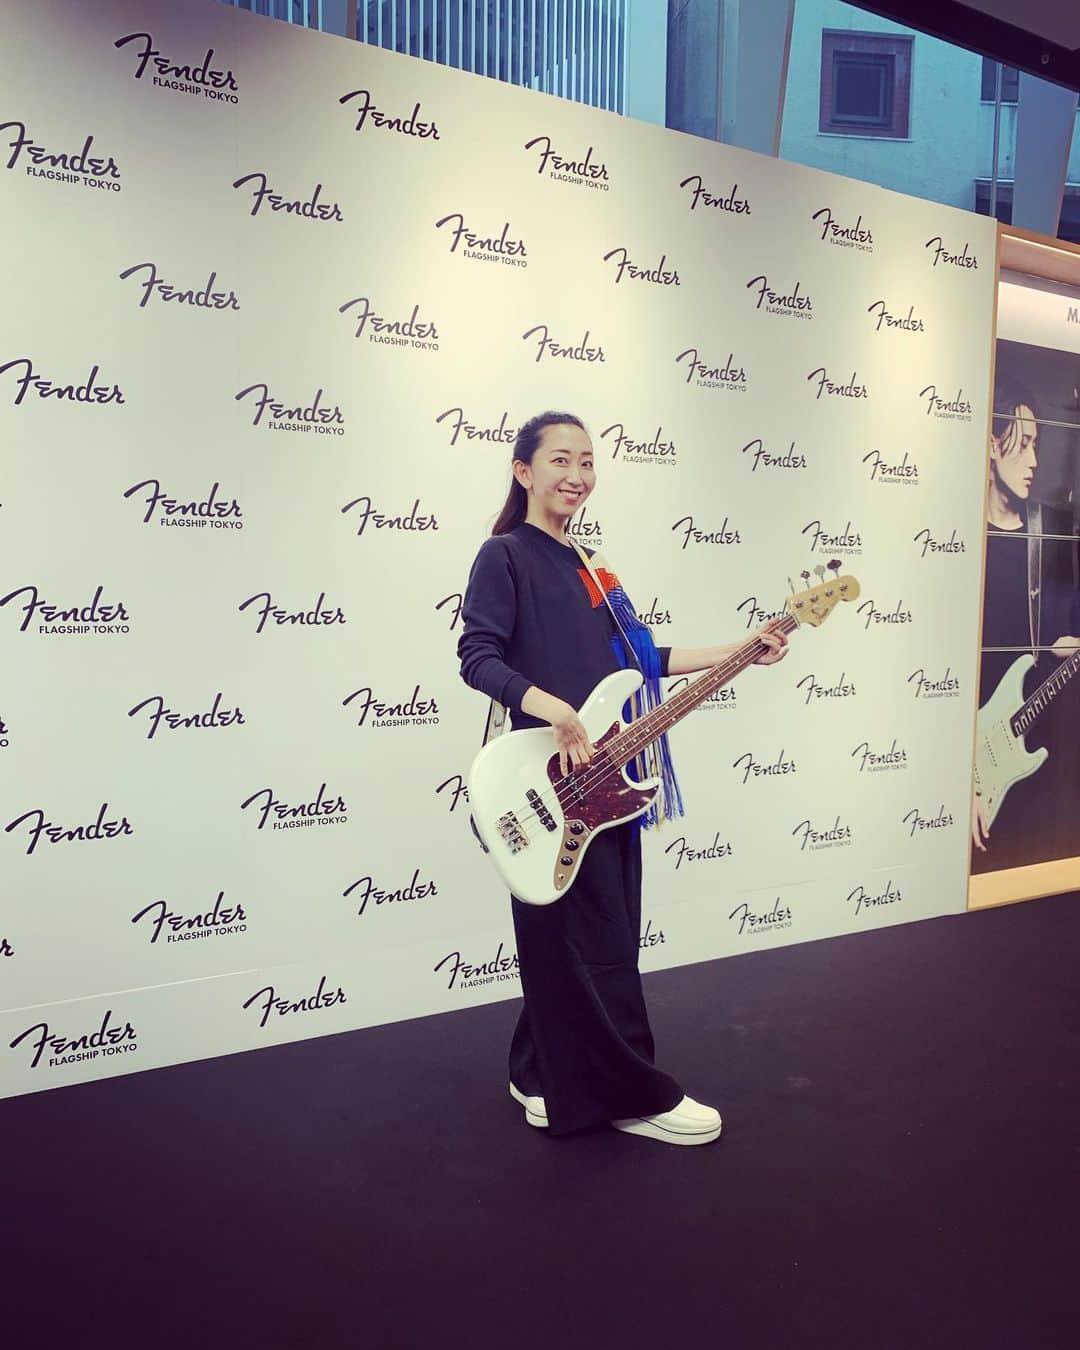 Rie fuのインスタグラム：「#fenderflagshiptokyo opening🎸  フェンダー初の旗艦店「FENDER FLAGSHIP TOKYO」オープン🎸🎉 カフェやイベントスペース、カスタムショップなど、音楽への愛情が詰まった素晴らしい空間。建築は新居を手がけていただいた@klein_dytham_architecture  The first Fender flagship store, with a cafe, event space, custom shop, a haven for music lovers created by the brilliant @klein_dytham_architecture  #fender #flagship #opening #tokyo #harajuku #omotesando #フェンダー」